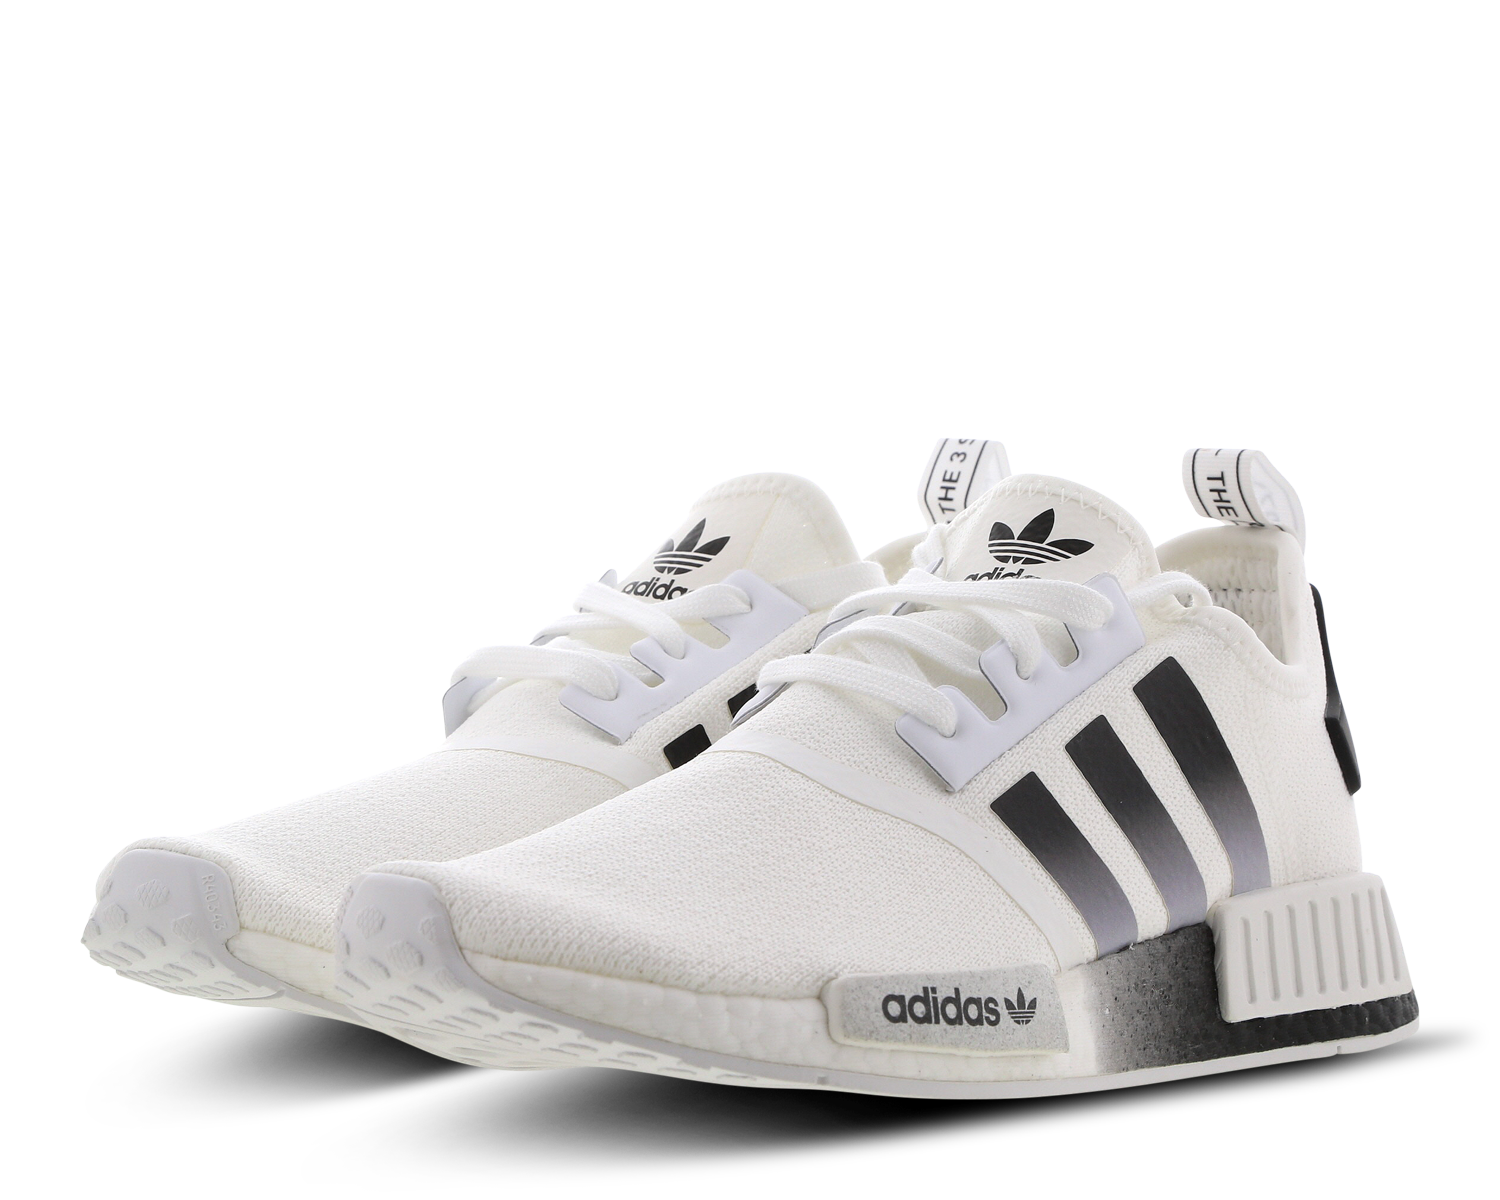 adidas nmd r1 homme or